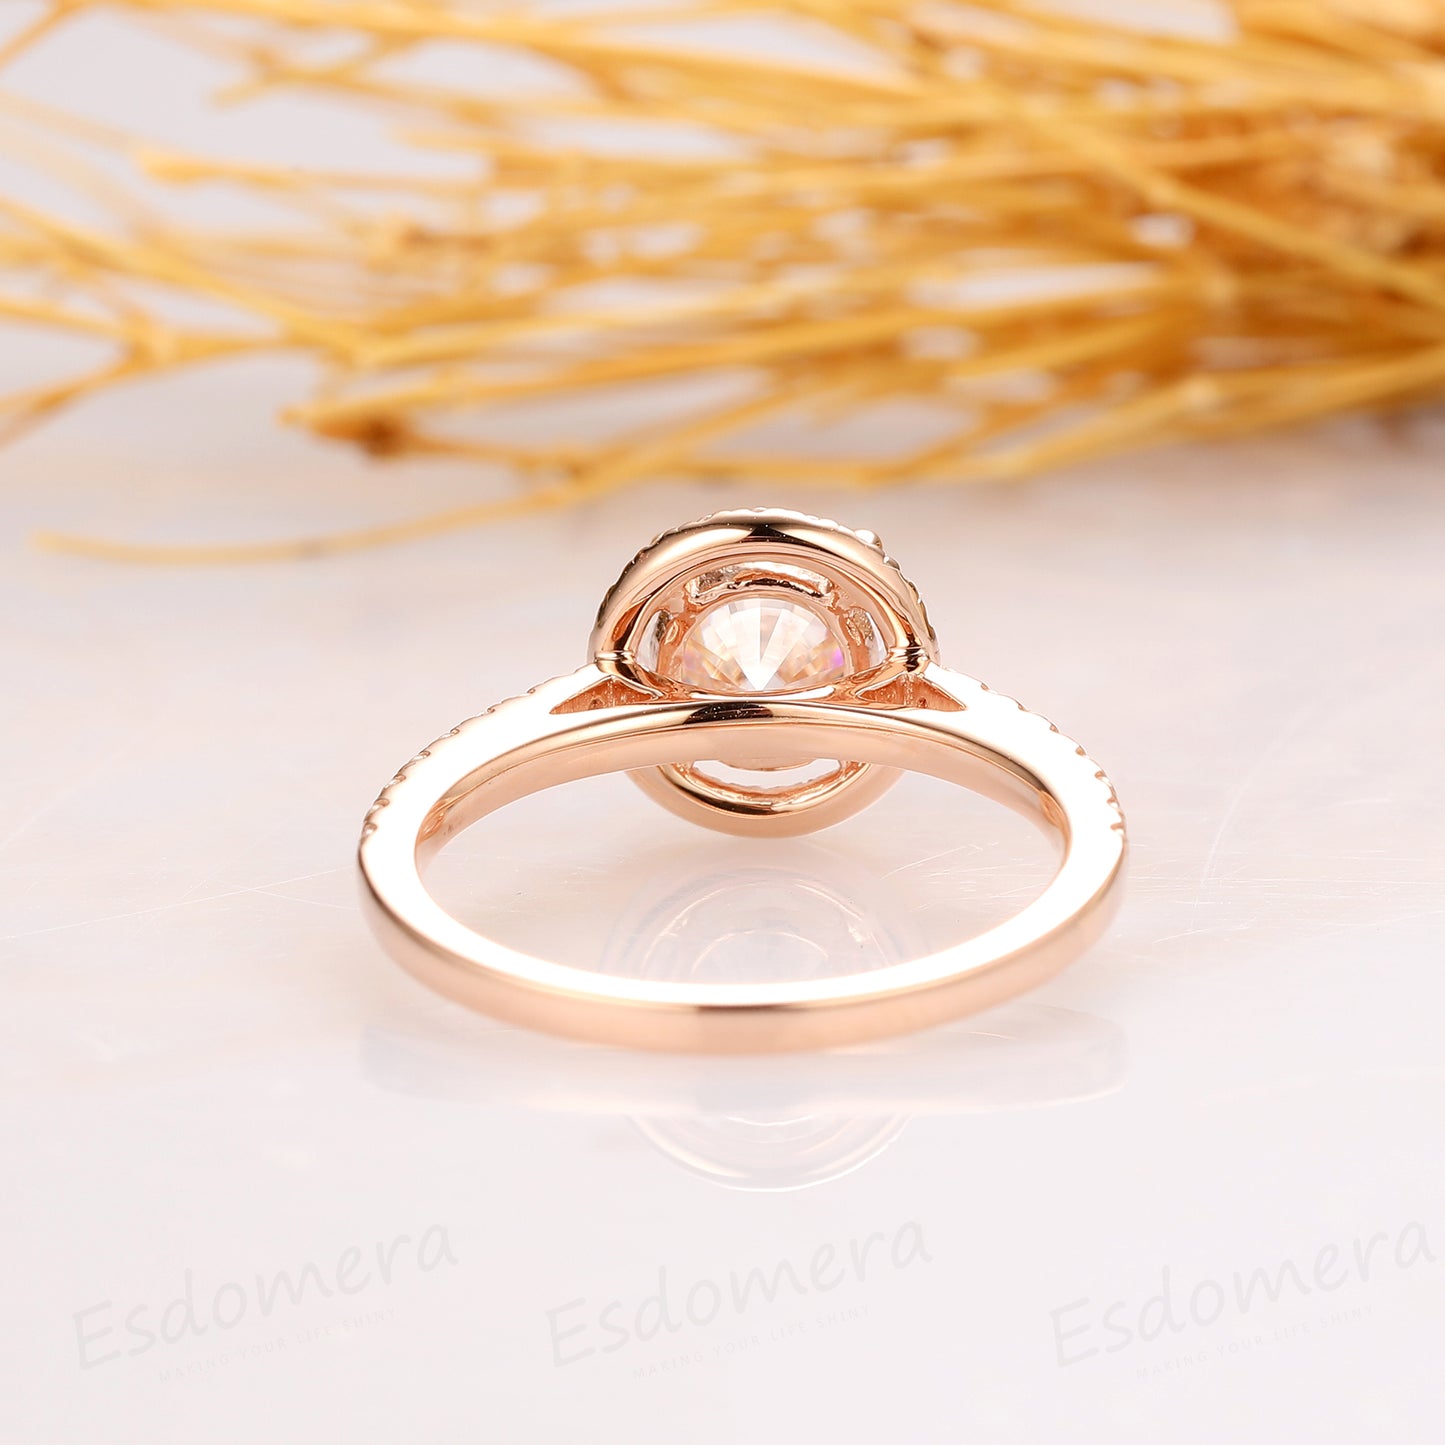 Halo Round Cut 6.5mm Moissanite Ring, Accent 14k Rose Gold Engagament Ring